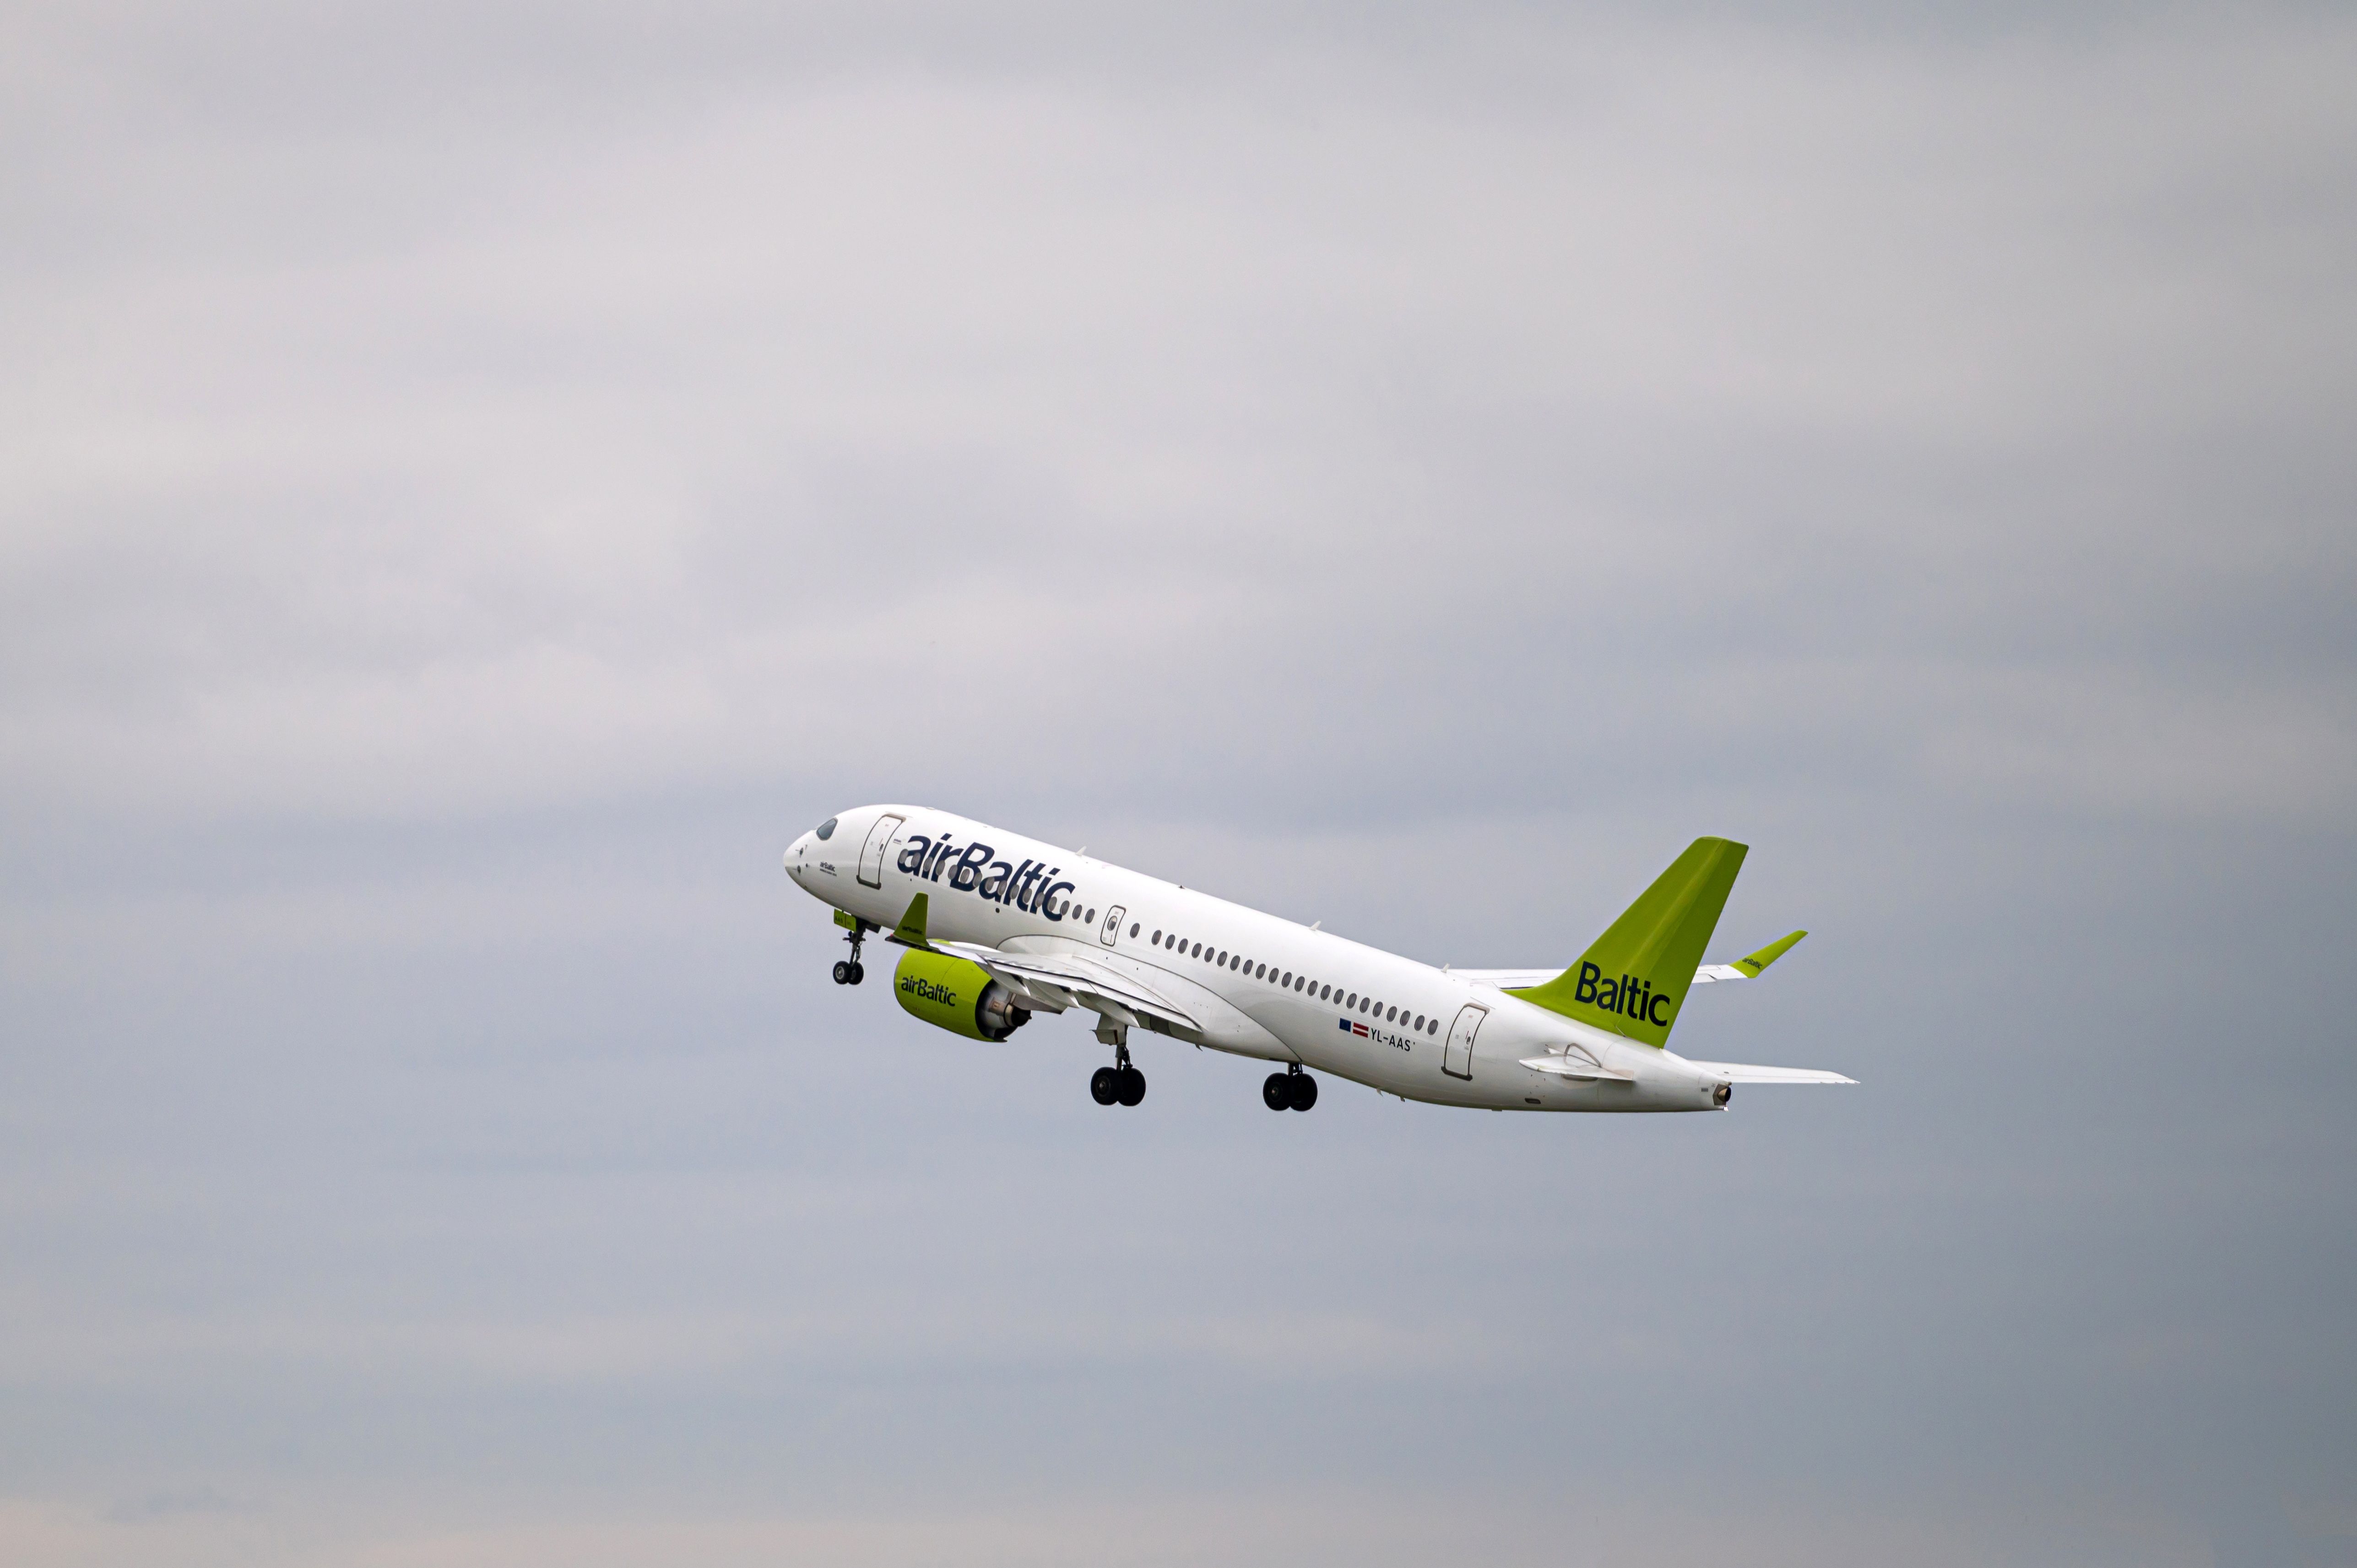 AirBaltic Airbus A220-300 YL-AAS takes off from RIX International Airport on cloudy autumn day.